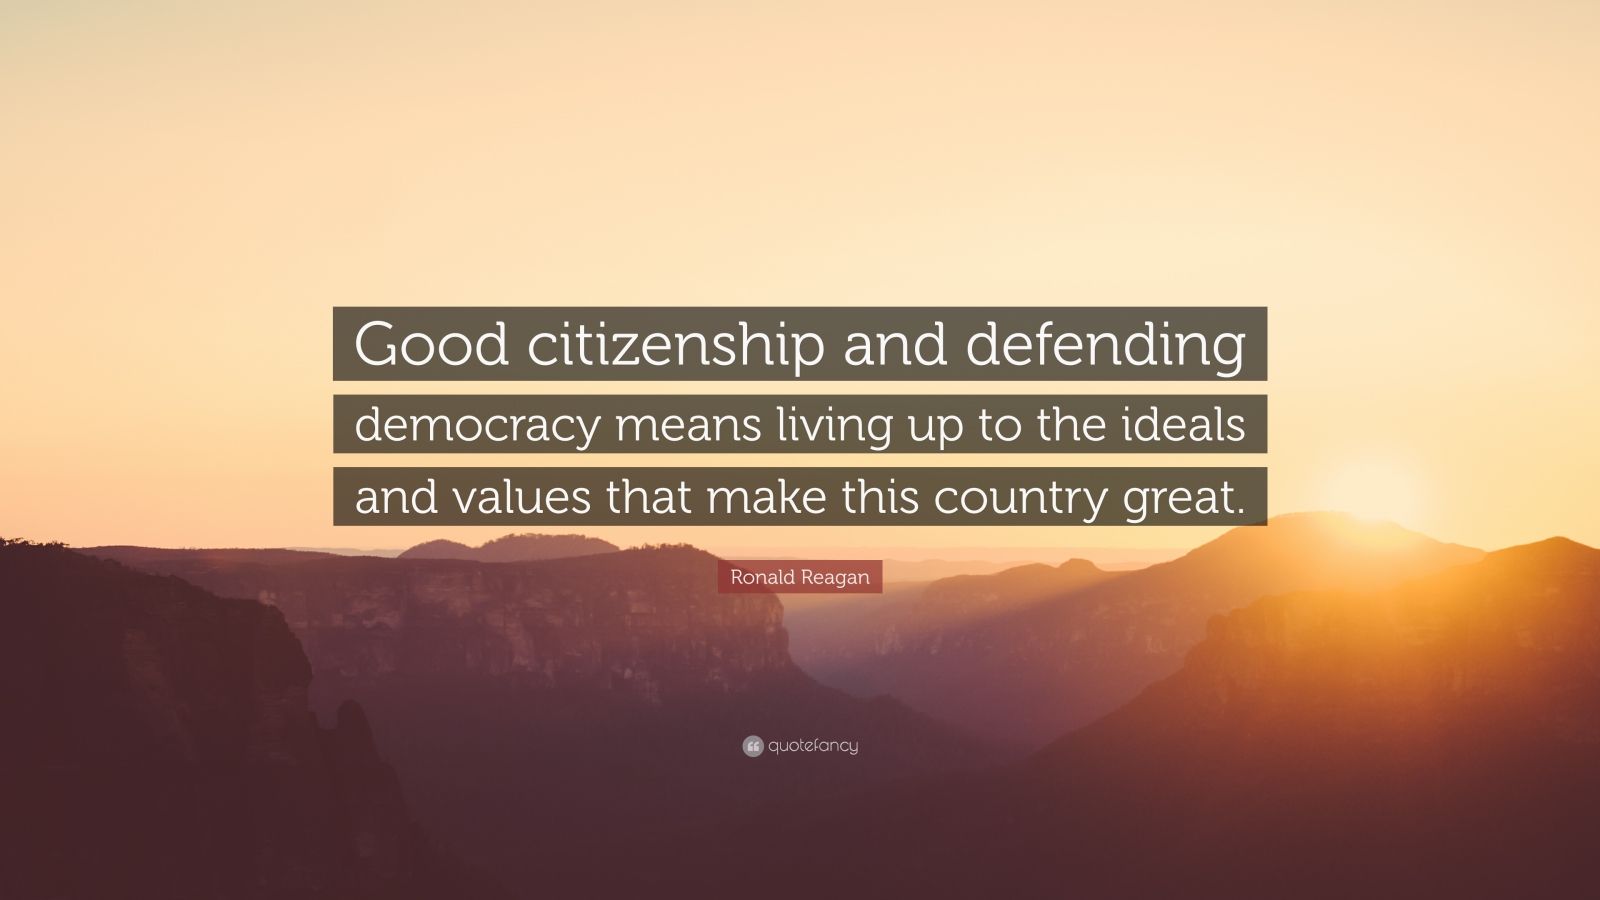 Ronald Reagan Quote: “Good citizenship and defending democracy means